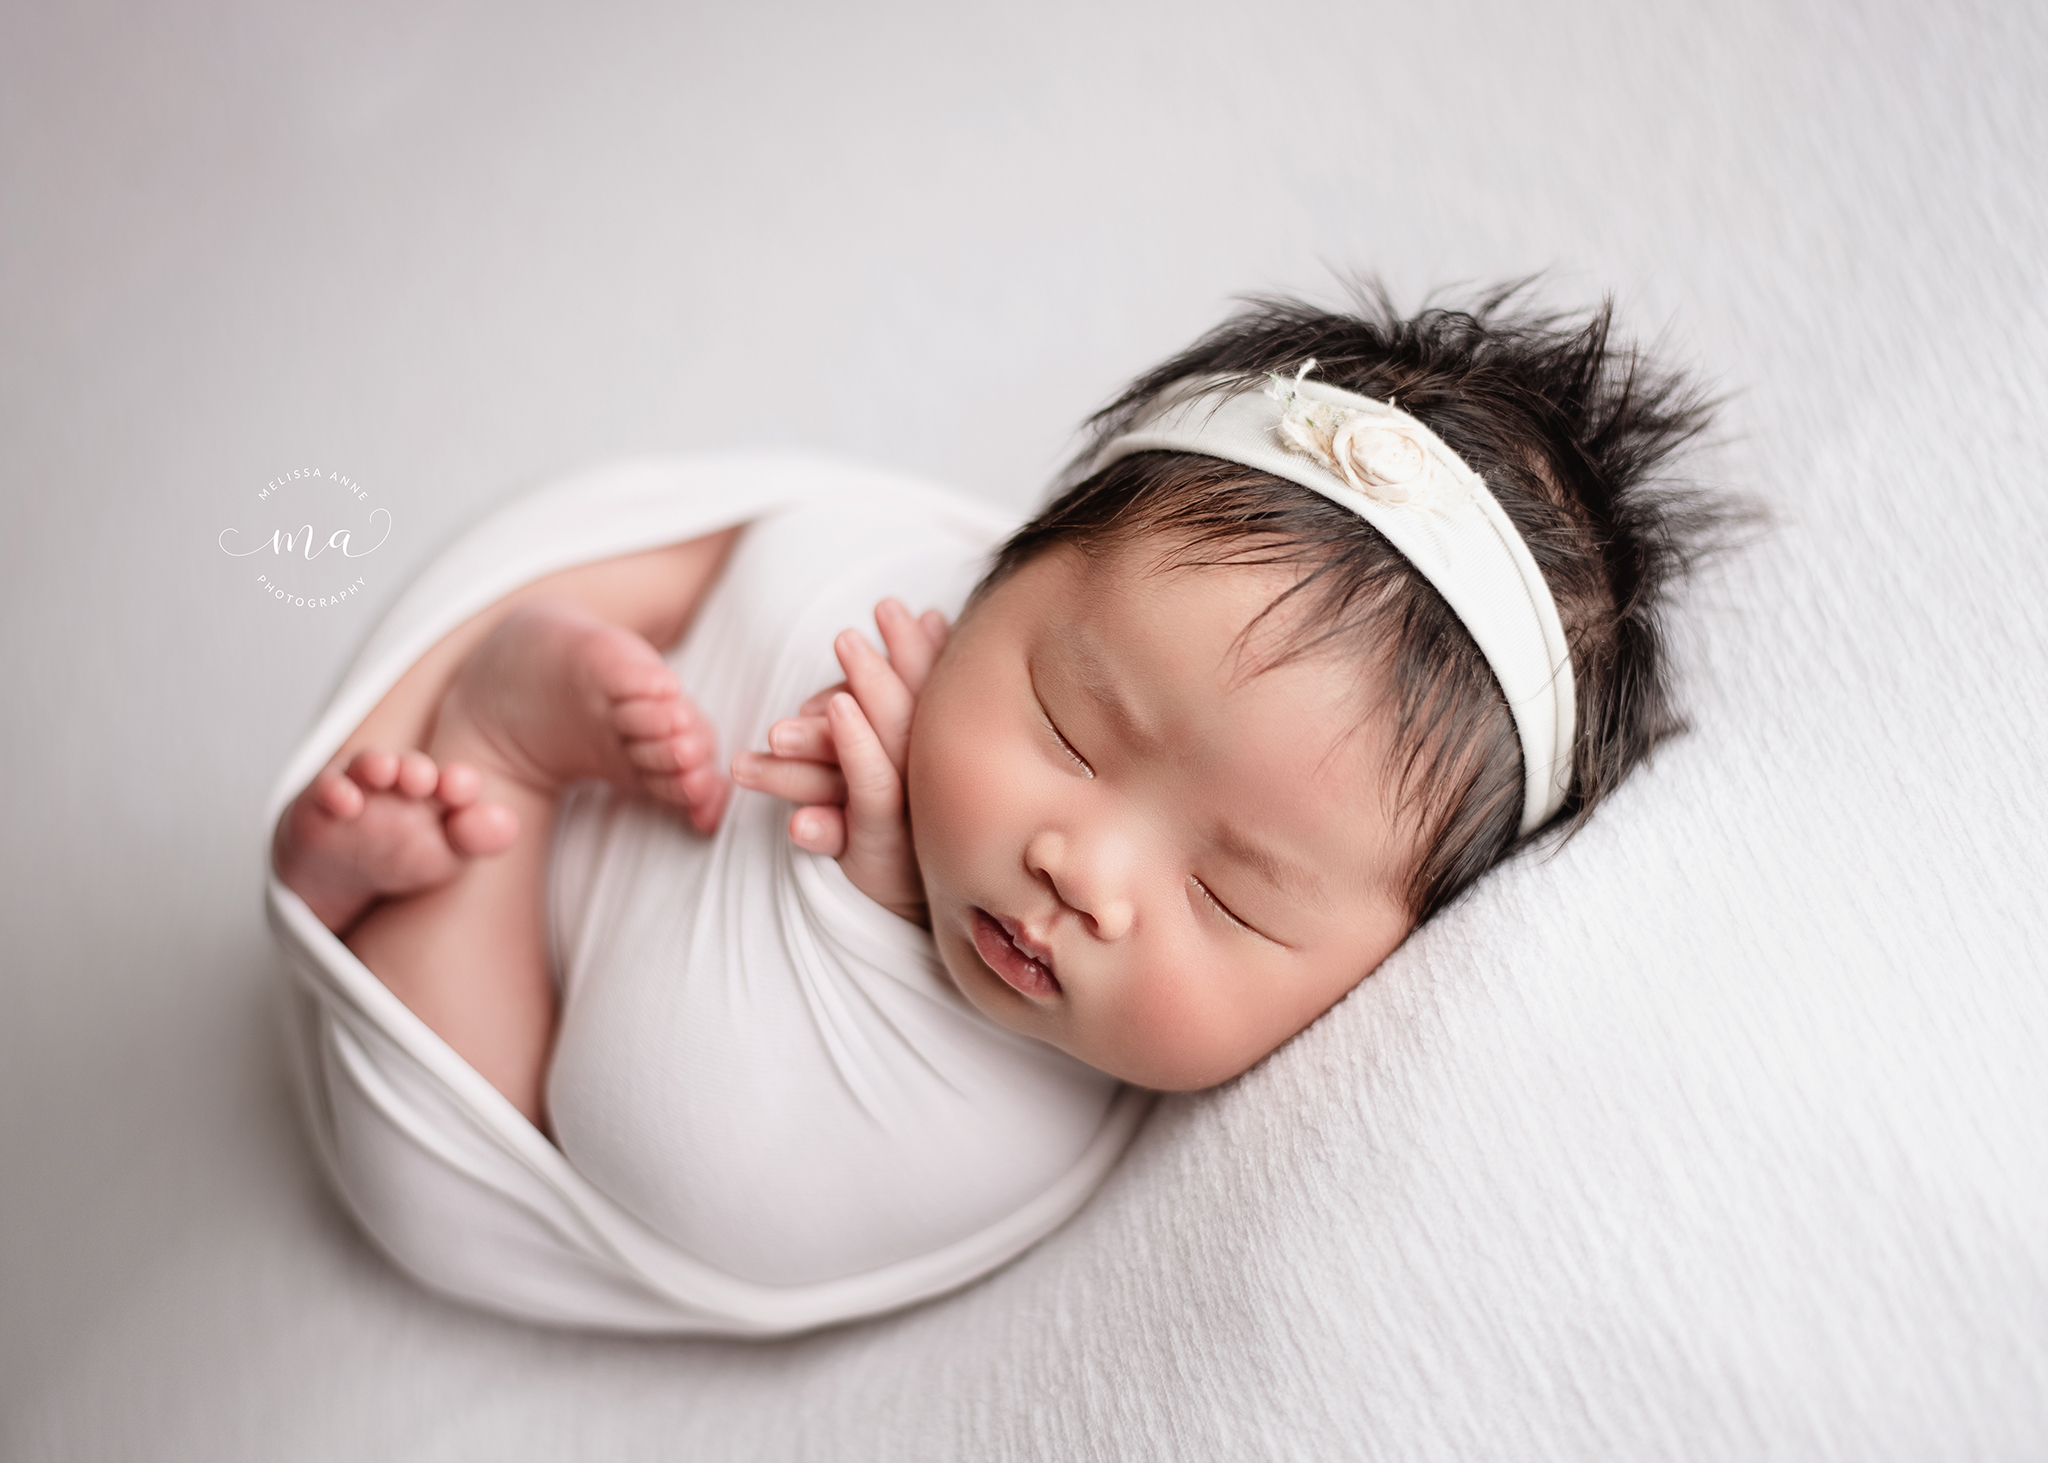 Ideas for Baby's First Photos | Newborn Girl Styling through Dainty  Accessories